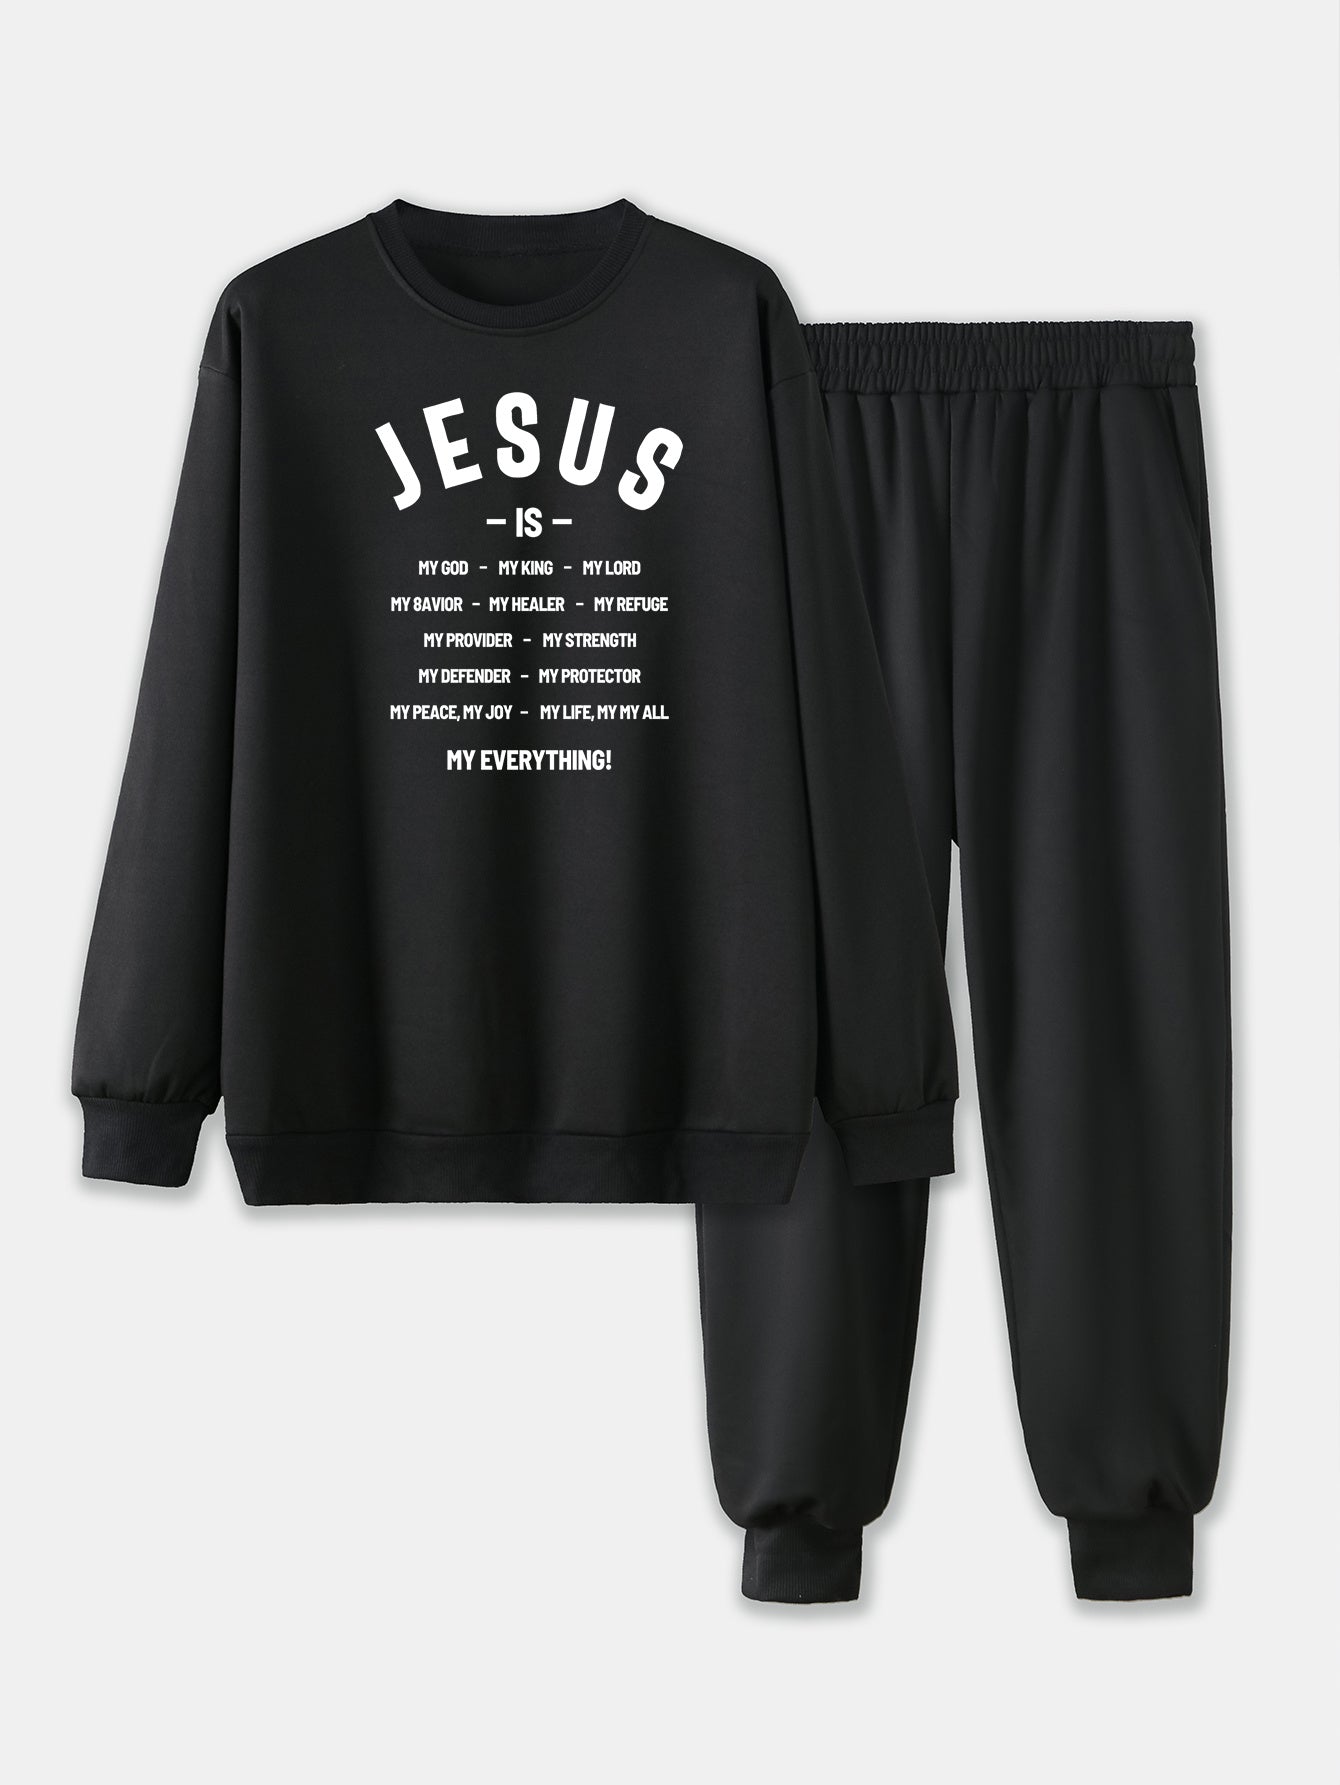 Jesus Is My Everything Plus Size Men's Christian Casual Outfit claimedbygoddesigns